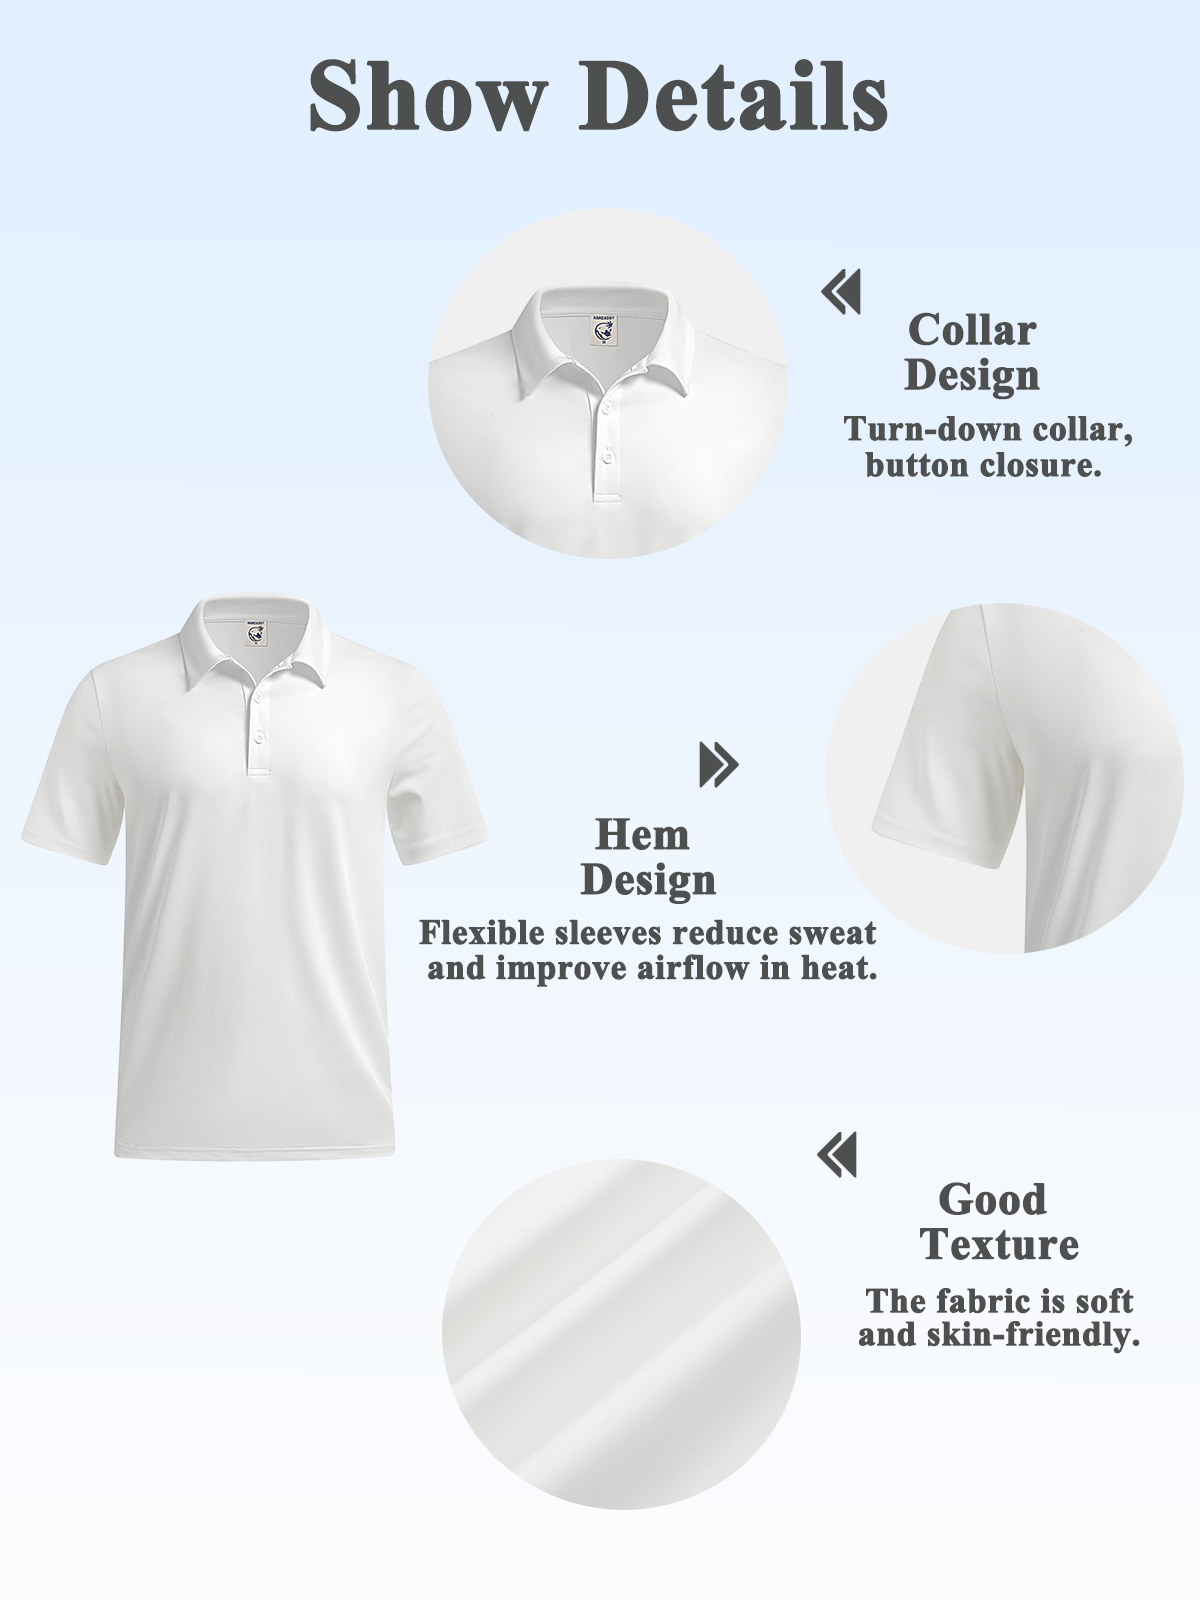 Moisture-wicking Beauty Golf Polo Shirt By Alice Meow